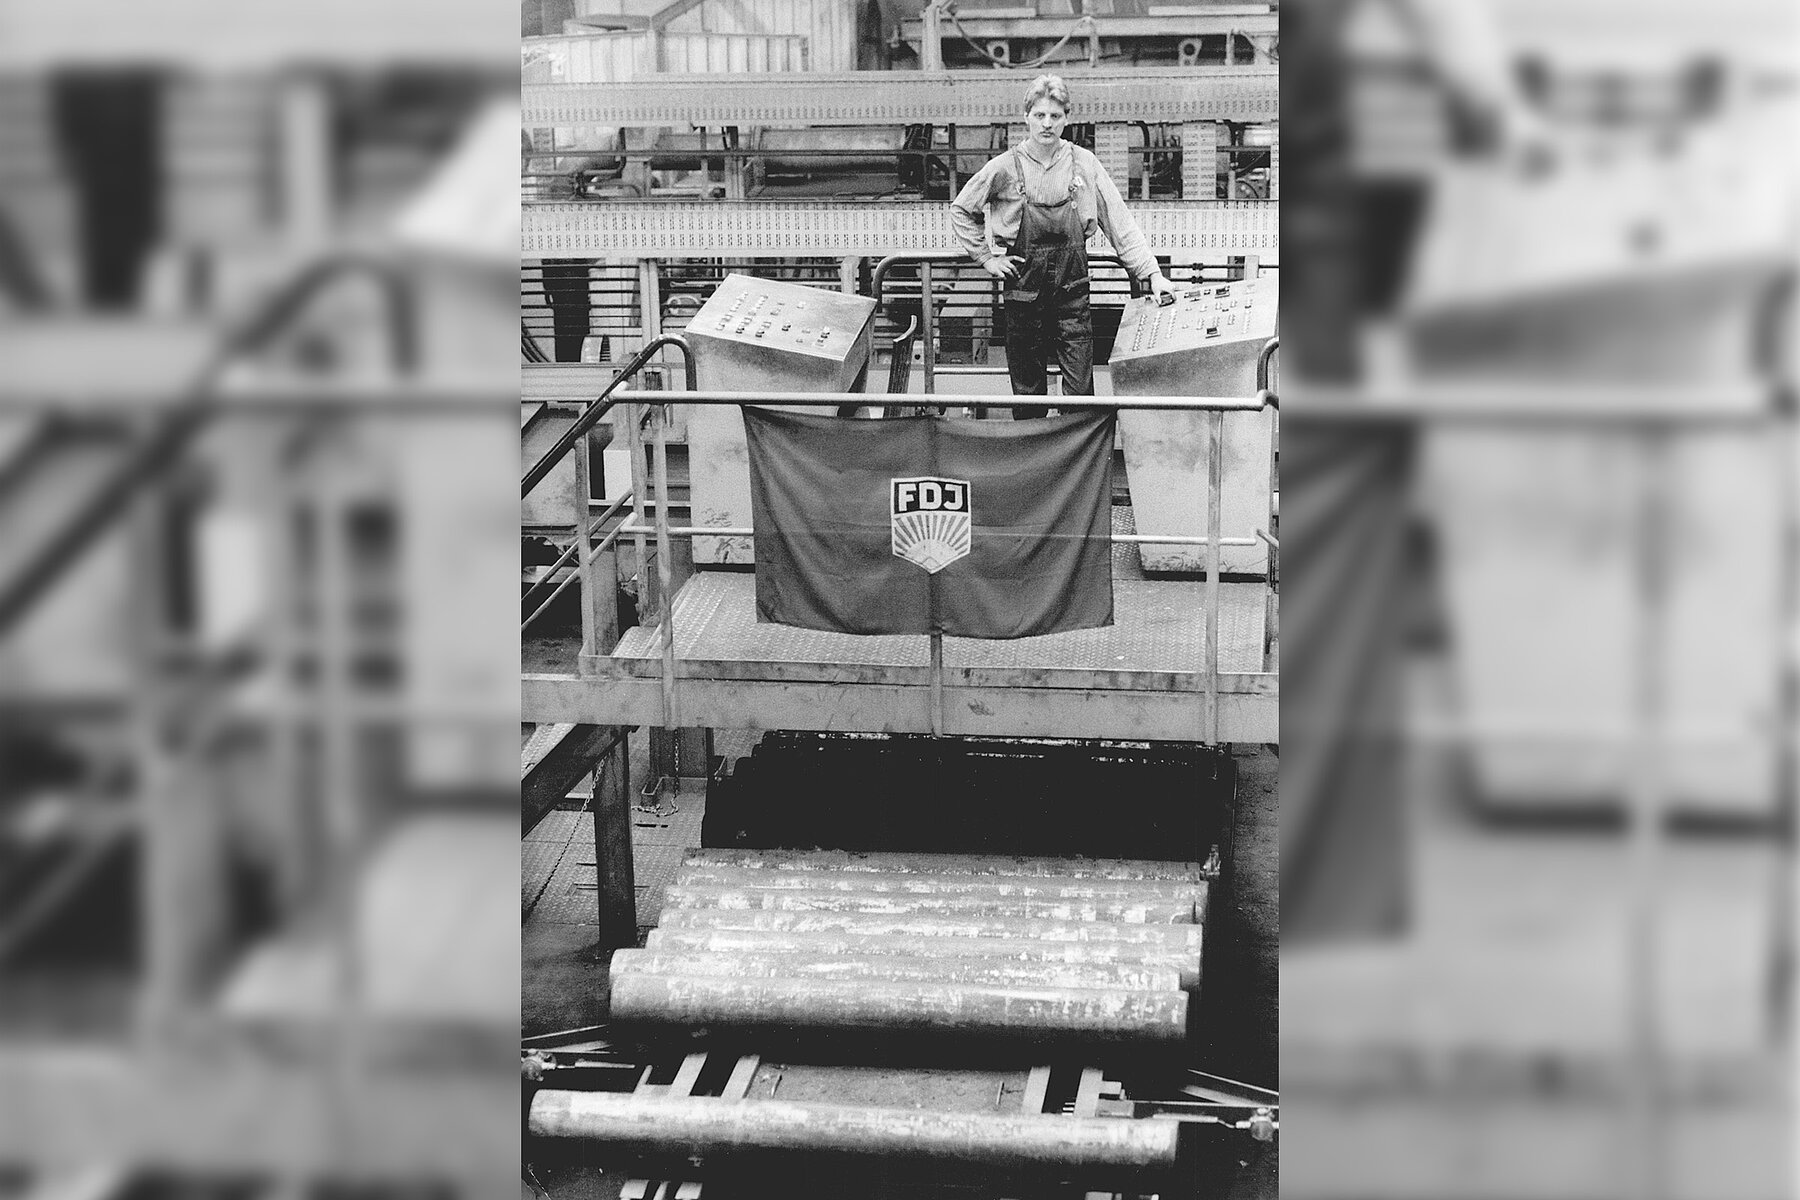 A worker on an elevated metal balcony. A flag with the logo of the Free German Youth hangs on the railing in front of him. In front of it and below it are several metal pipes in a row.